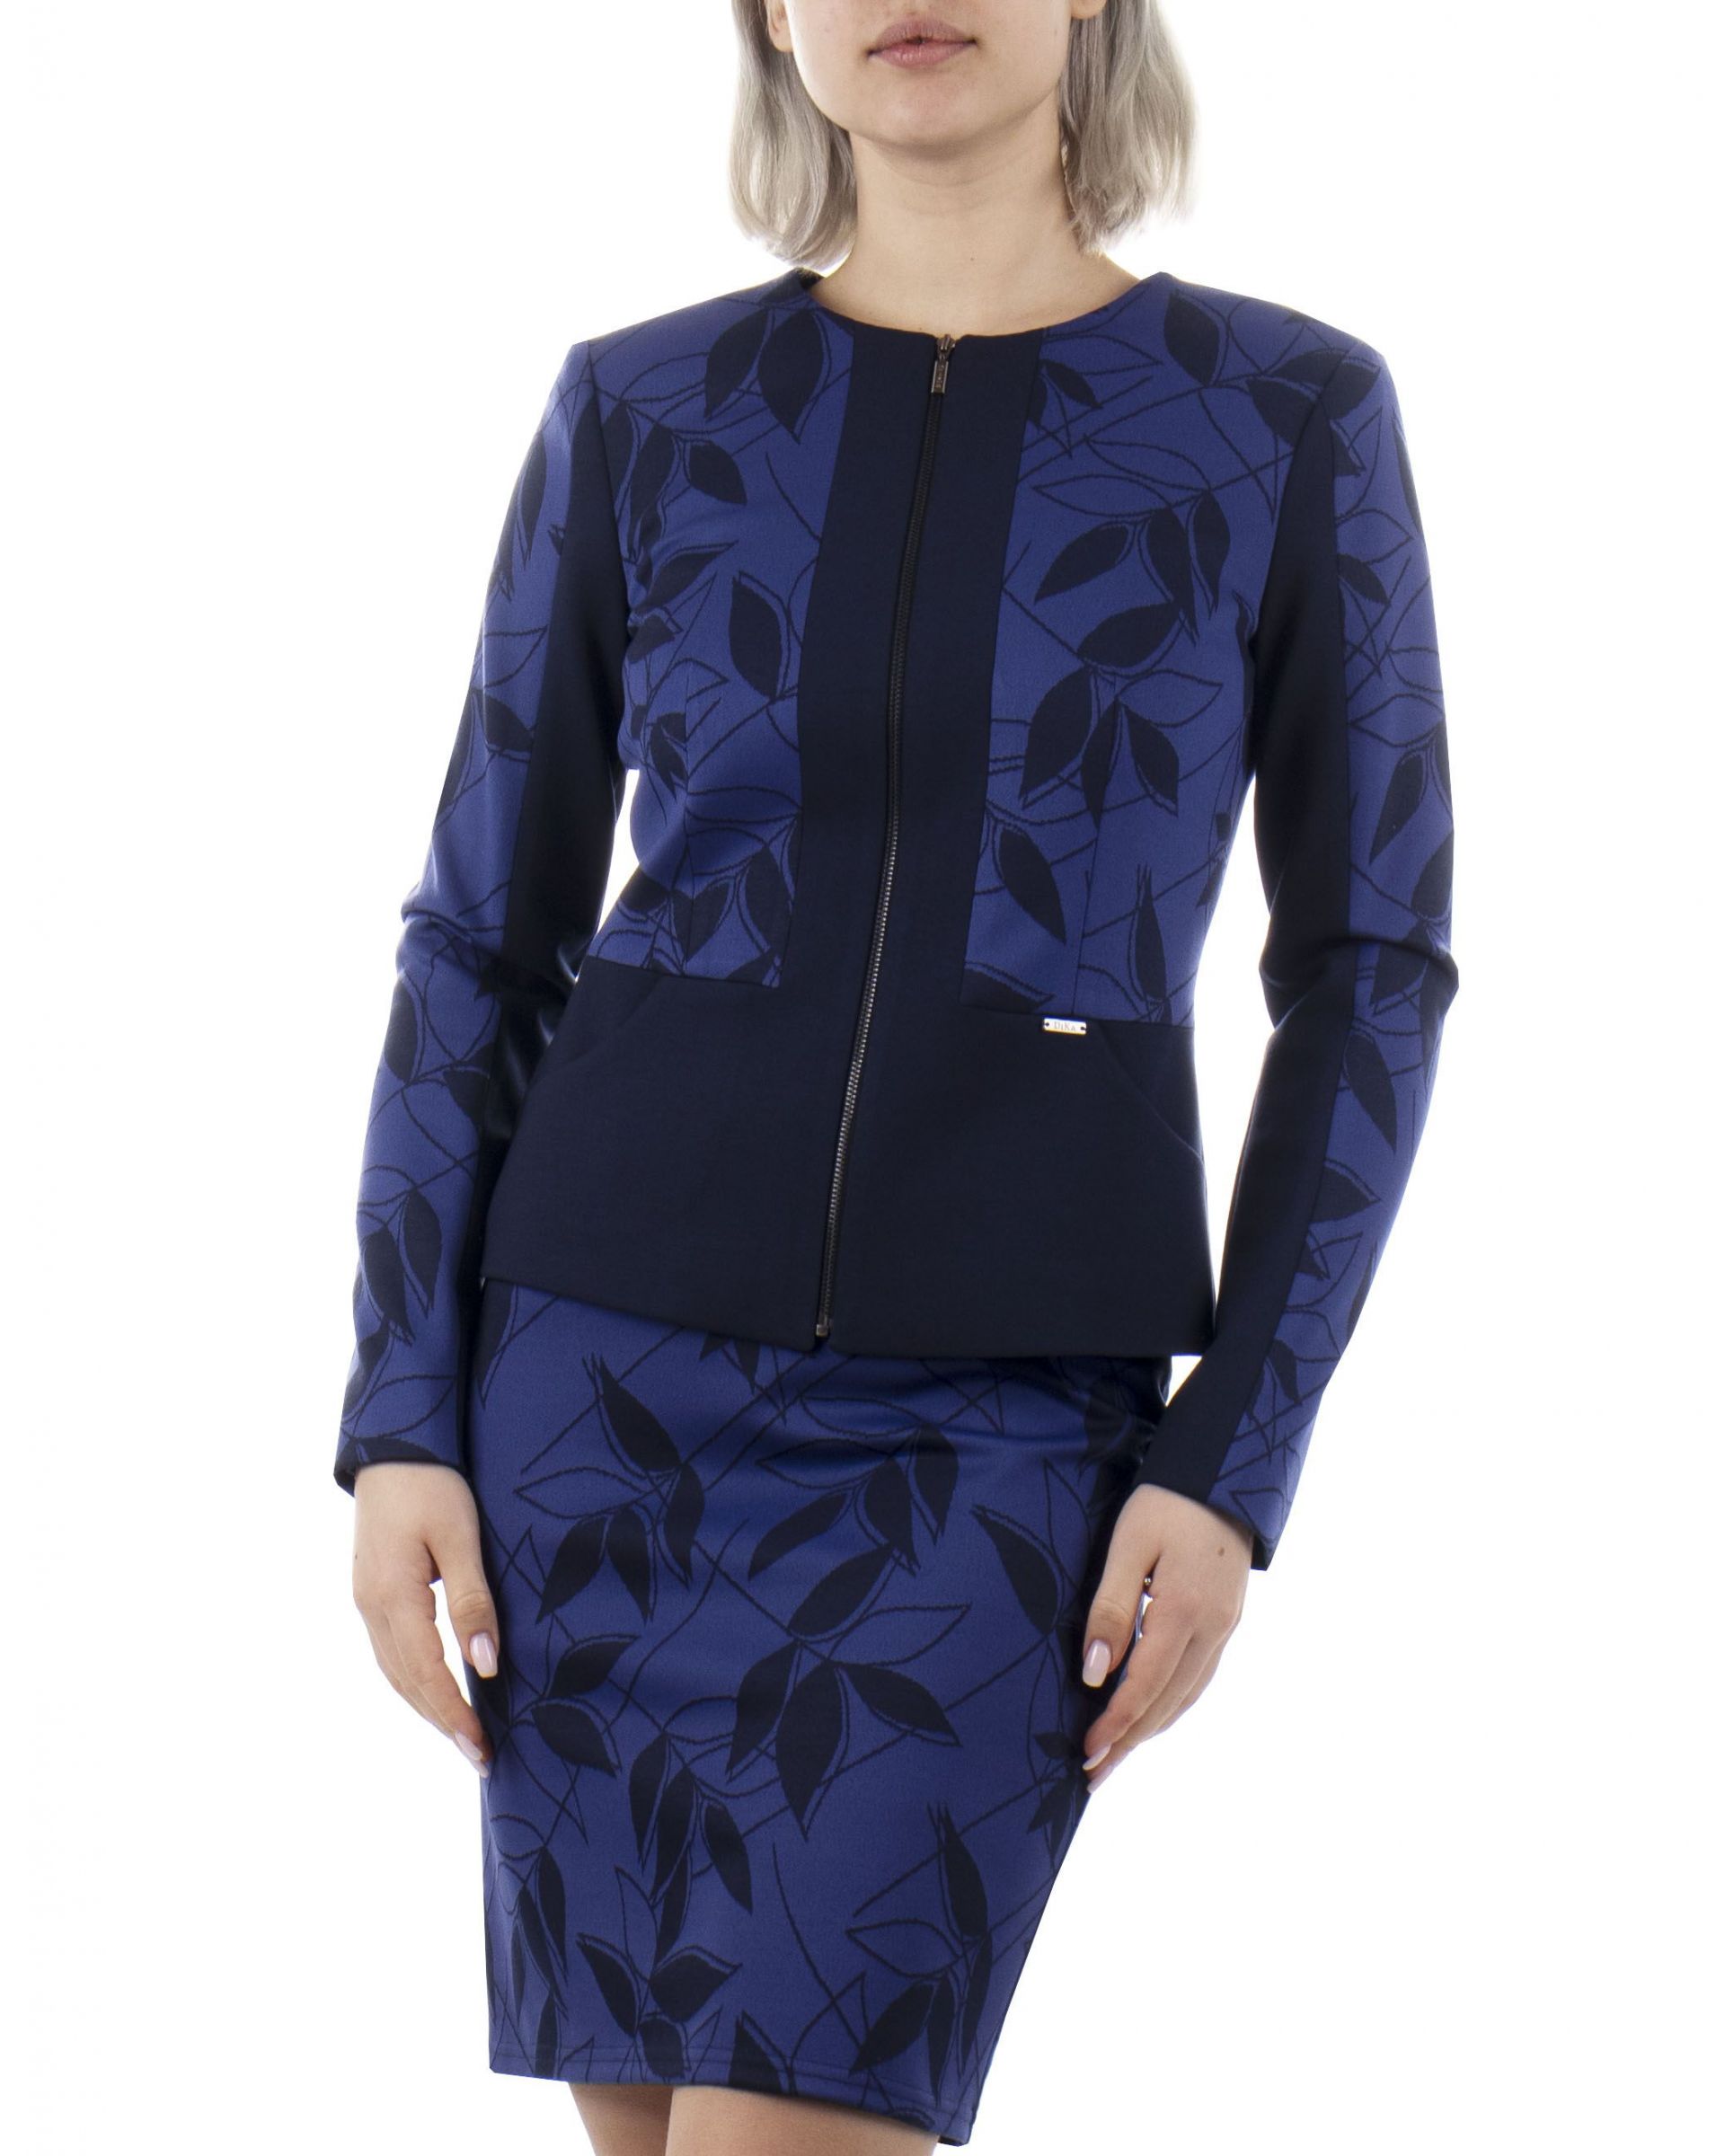 Zipper jacket with round neck, with contrasting elements with stylized leaves print 2